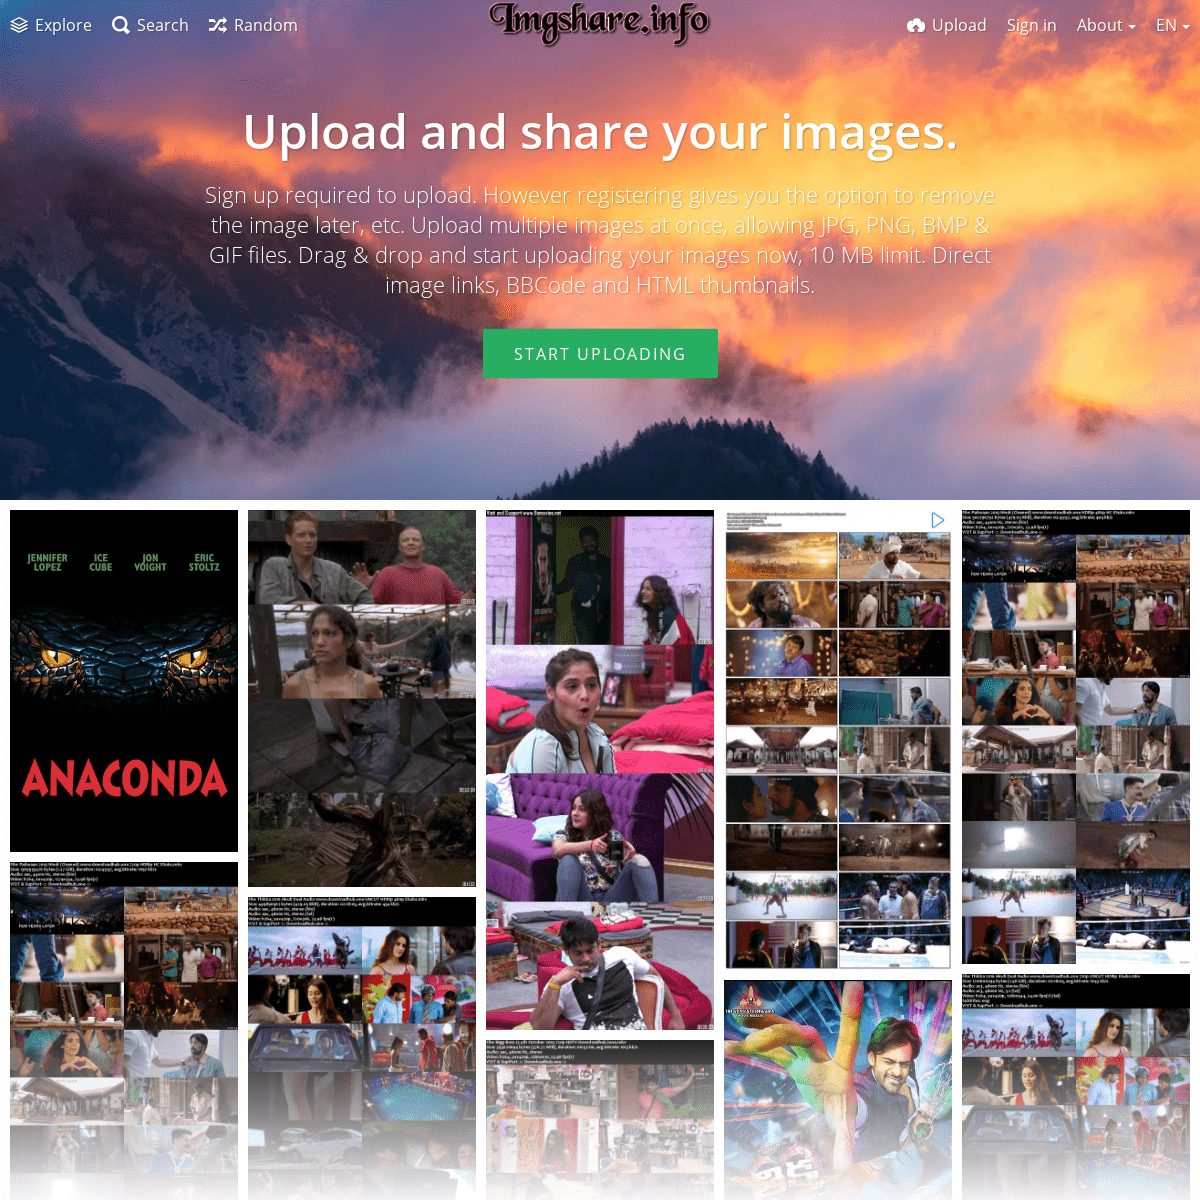 Imgshare.info - The Best place for your image hosting and image sharing